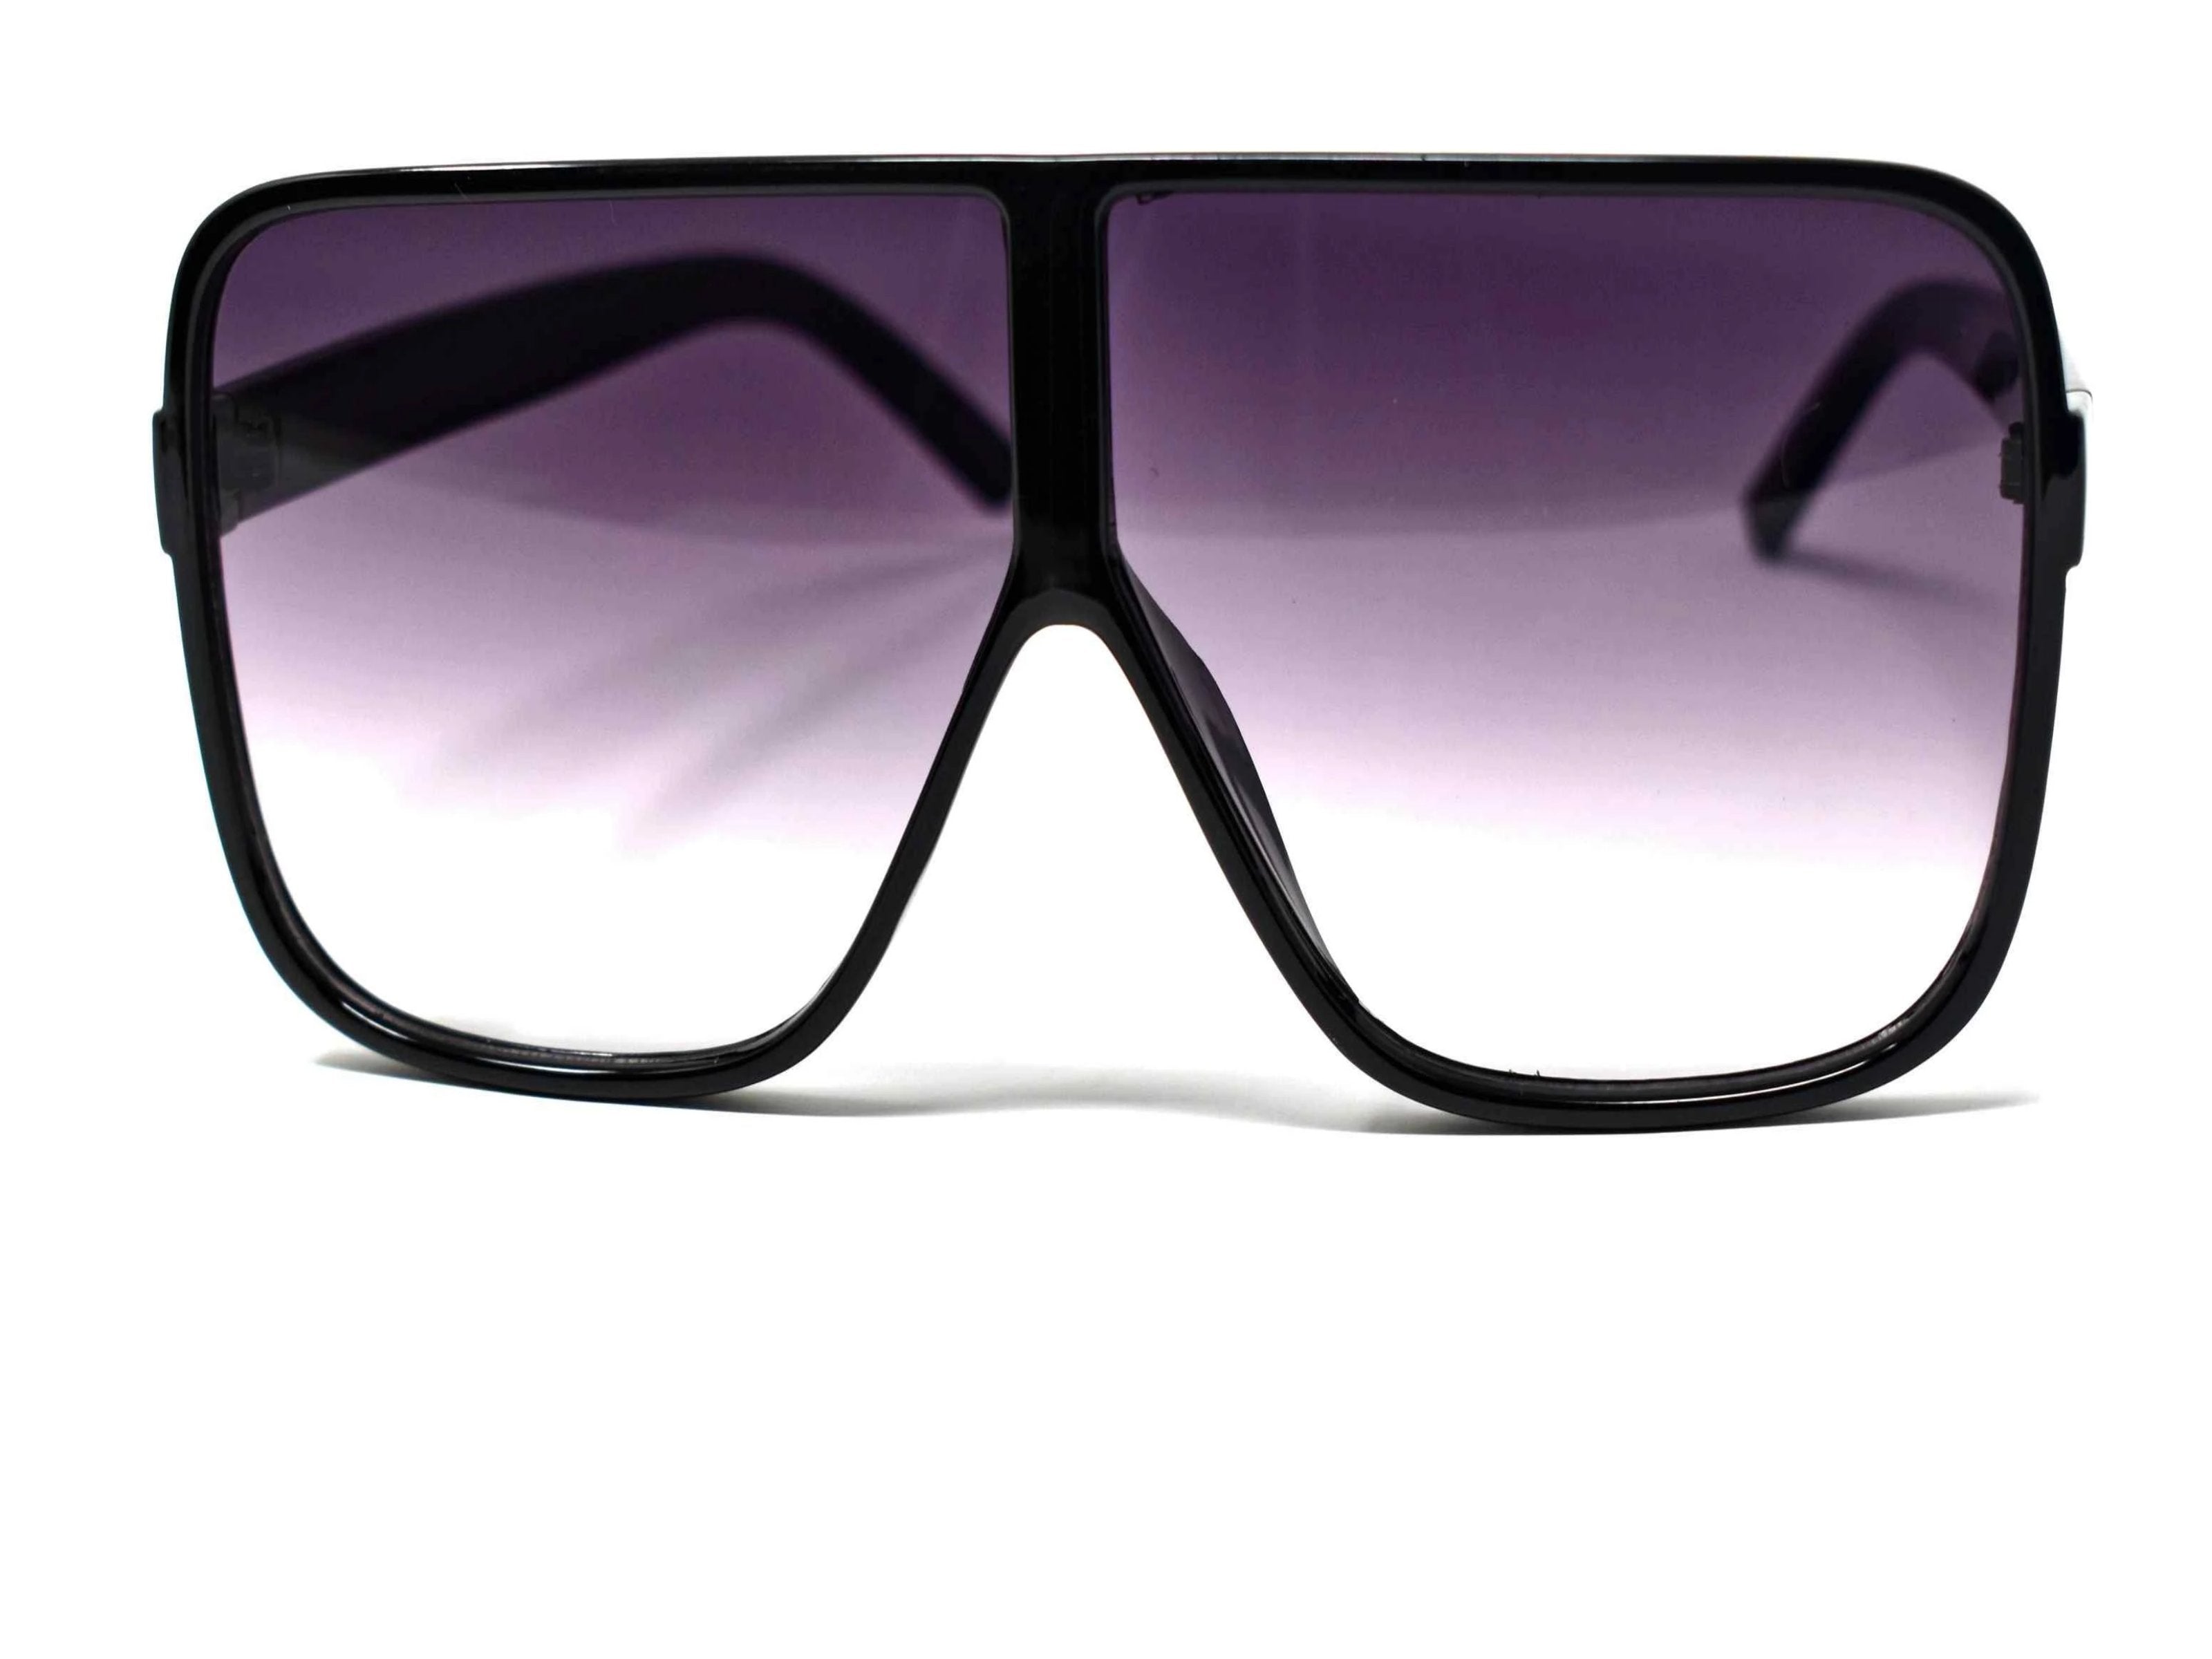 Certified stylish is what they will say once they get a glimpse of you in our oversized Gladiolus black shield style glasses with a black ombre lens.